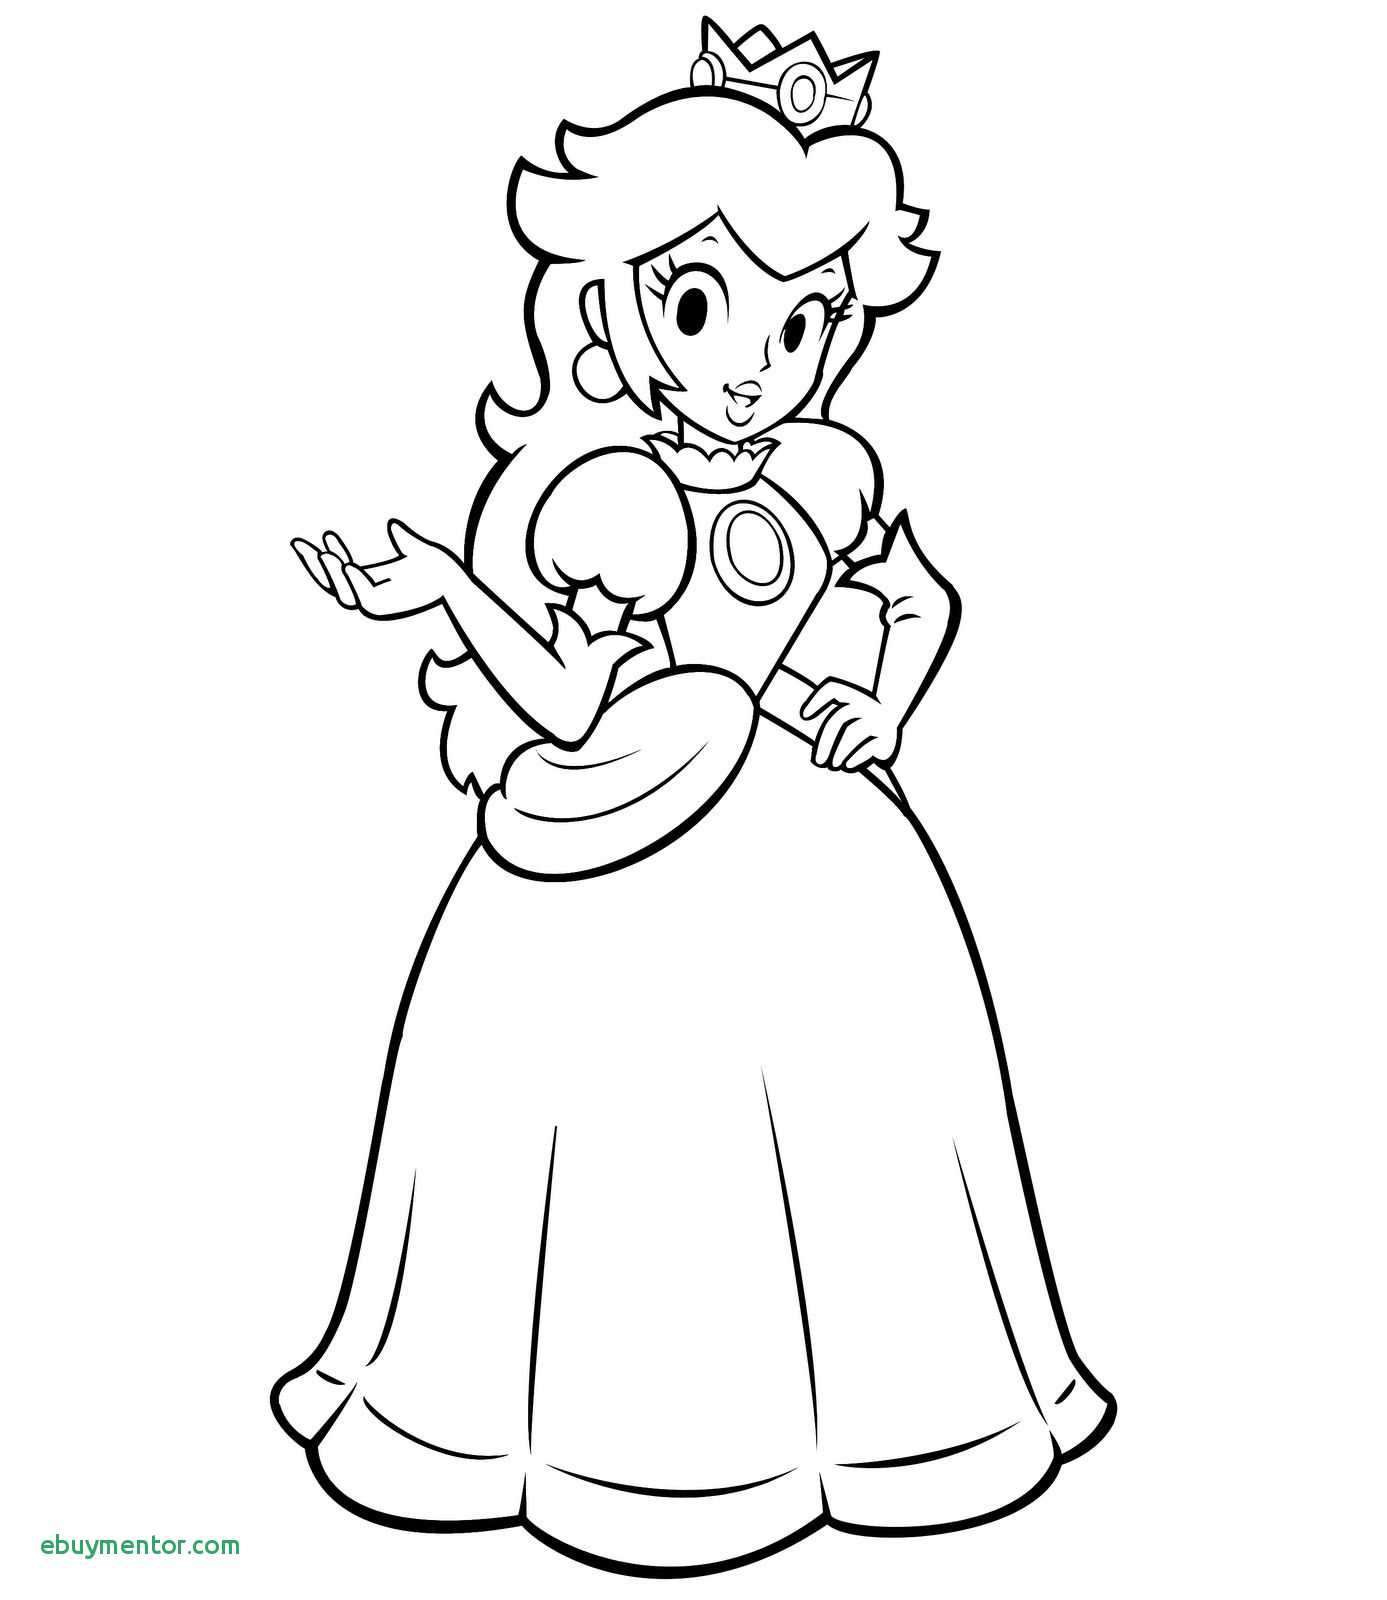 Paper Princess Peach Coloring Page Free Printable Pages Inspirational Kids Coloring Pages Princess